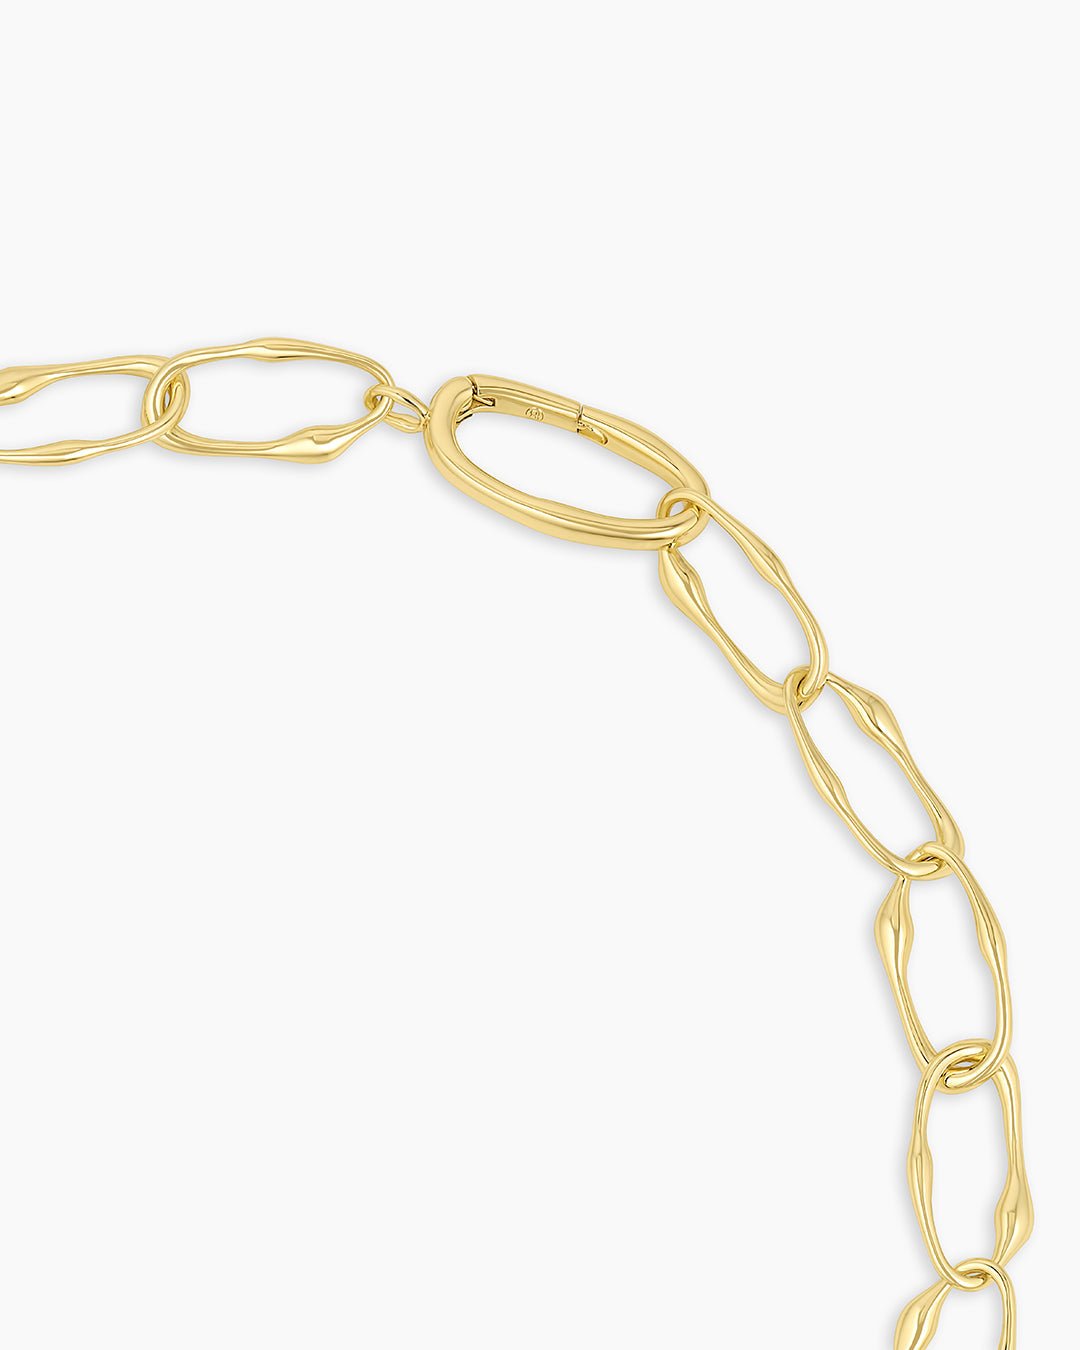 Jagger Necklace || option::Gold Plated